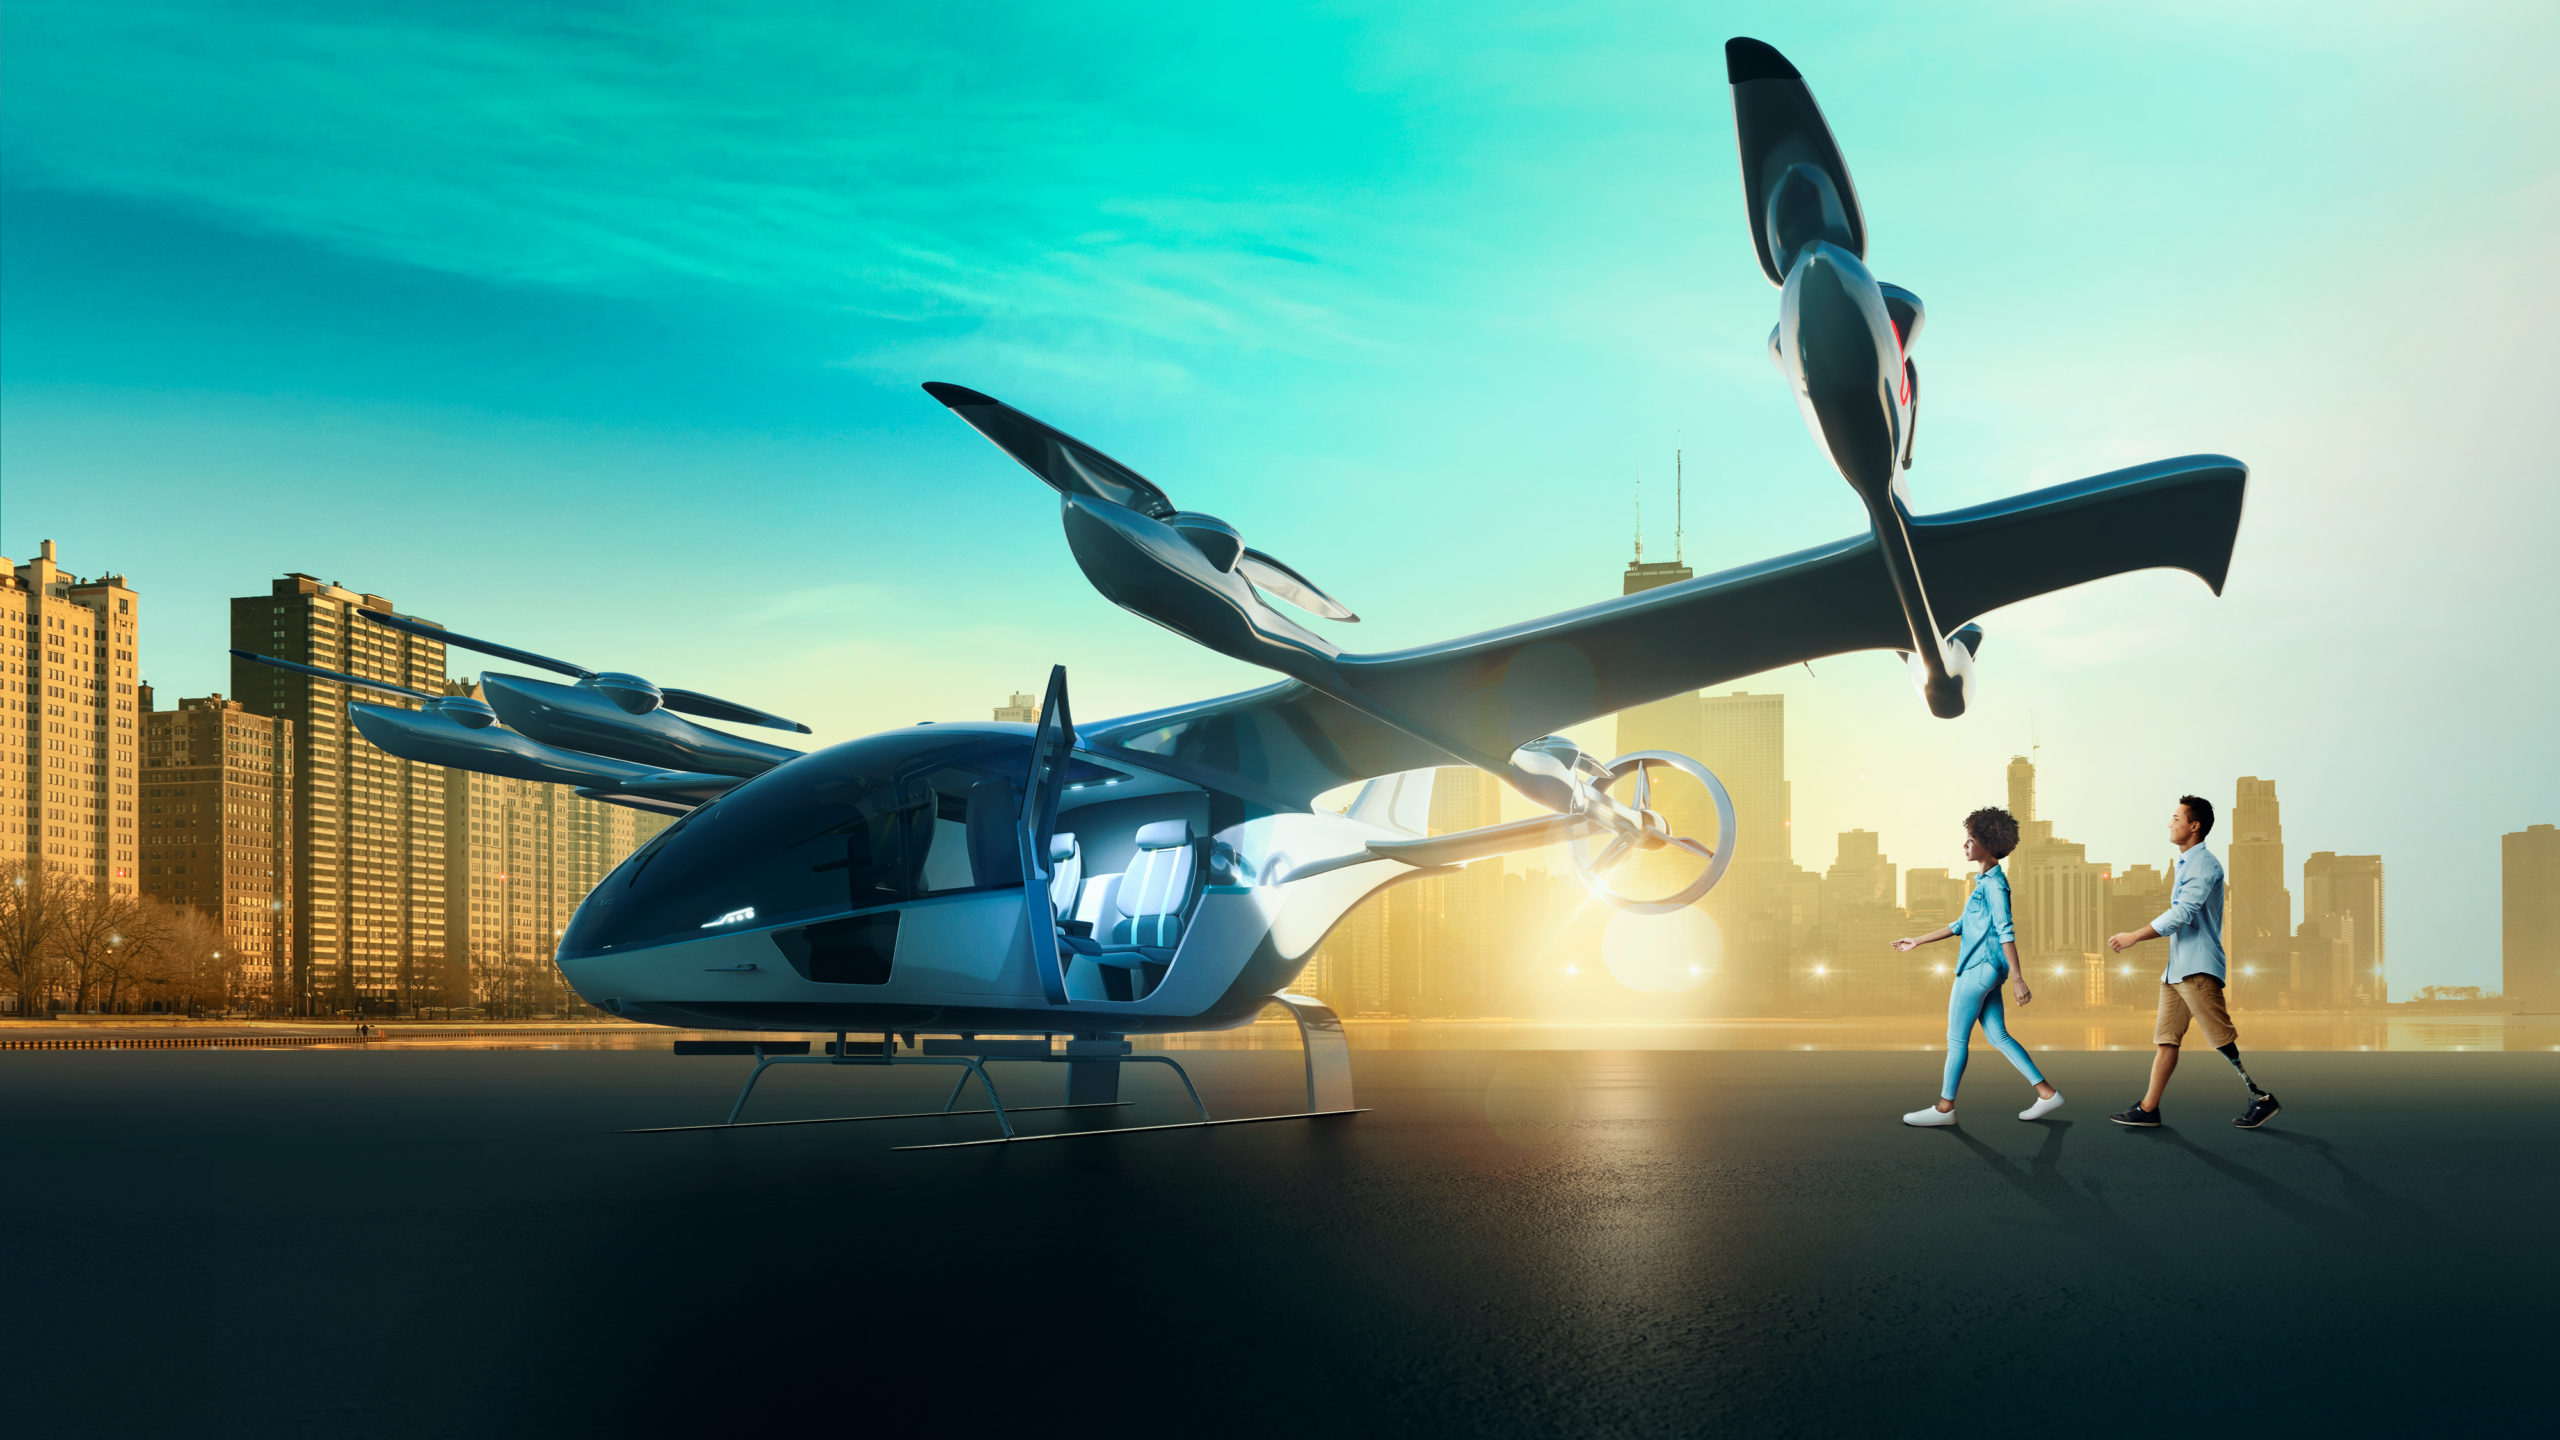 Eve Announces First North American Urban Air Mobility Simulation in Chicago